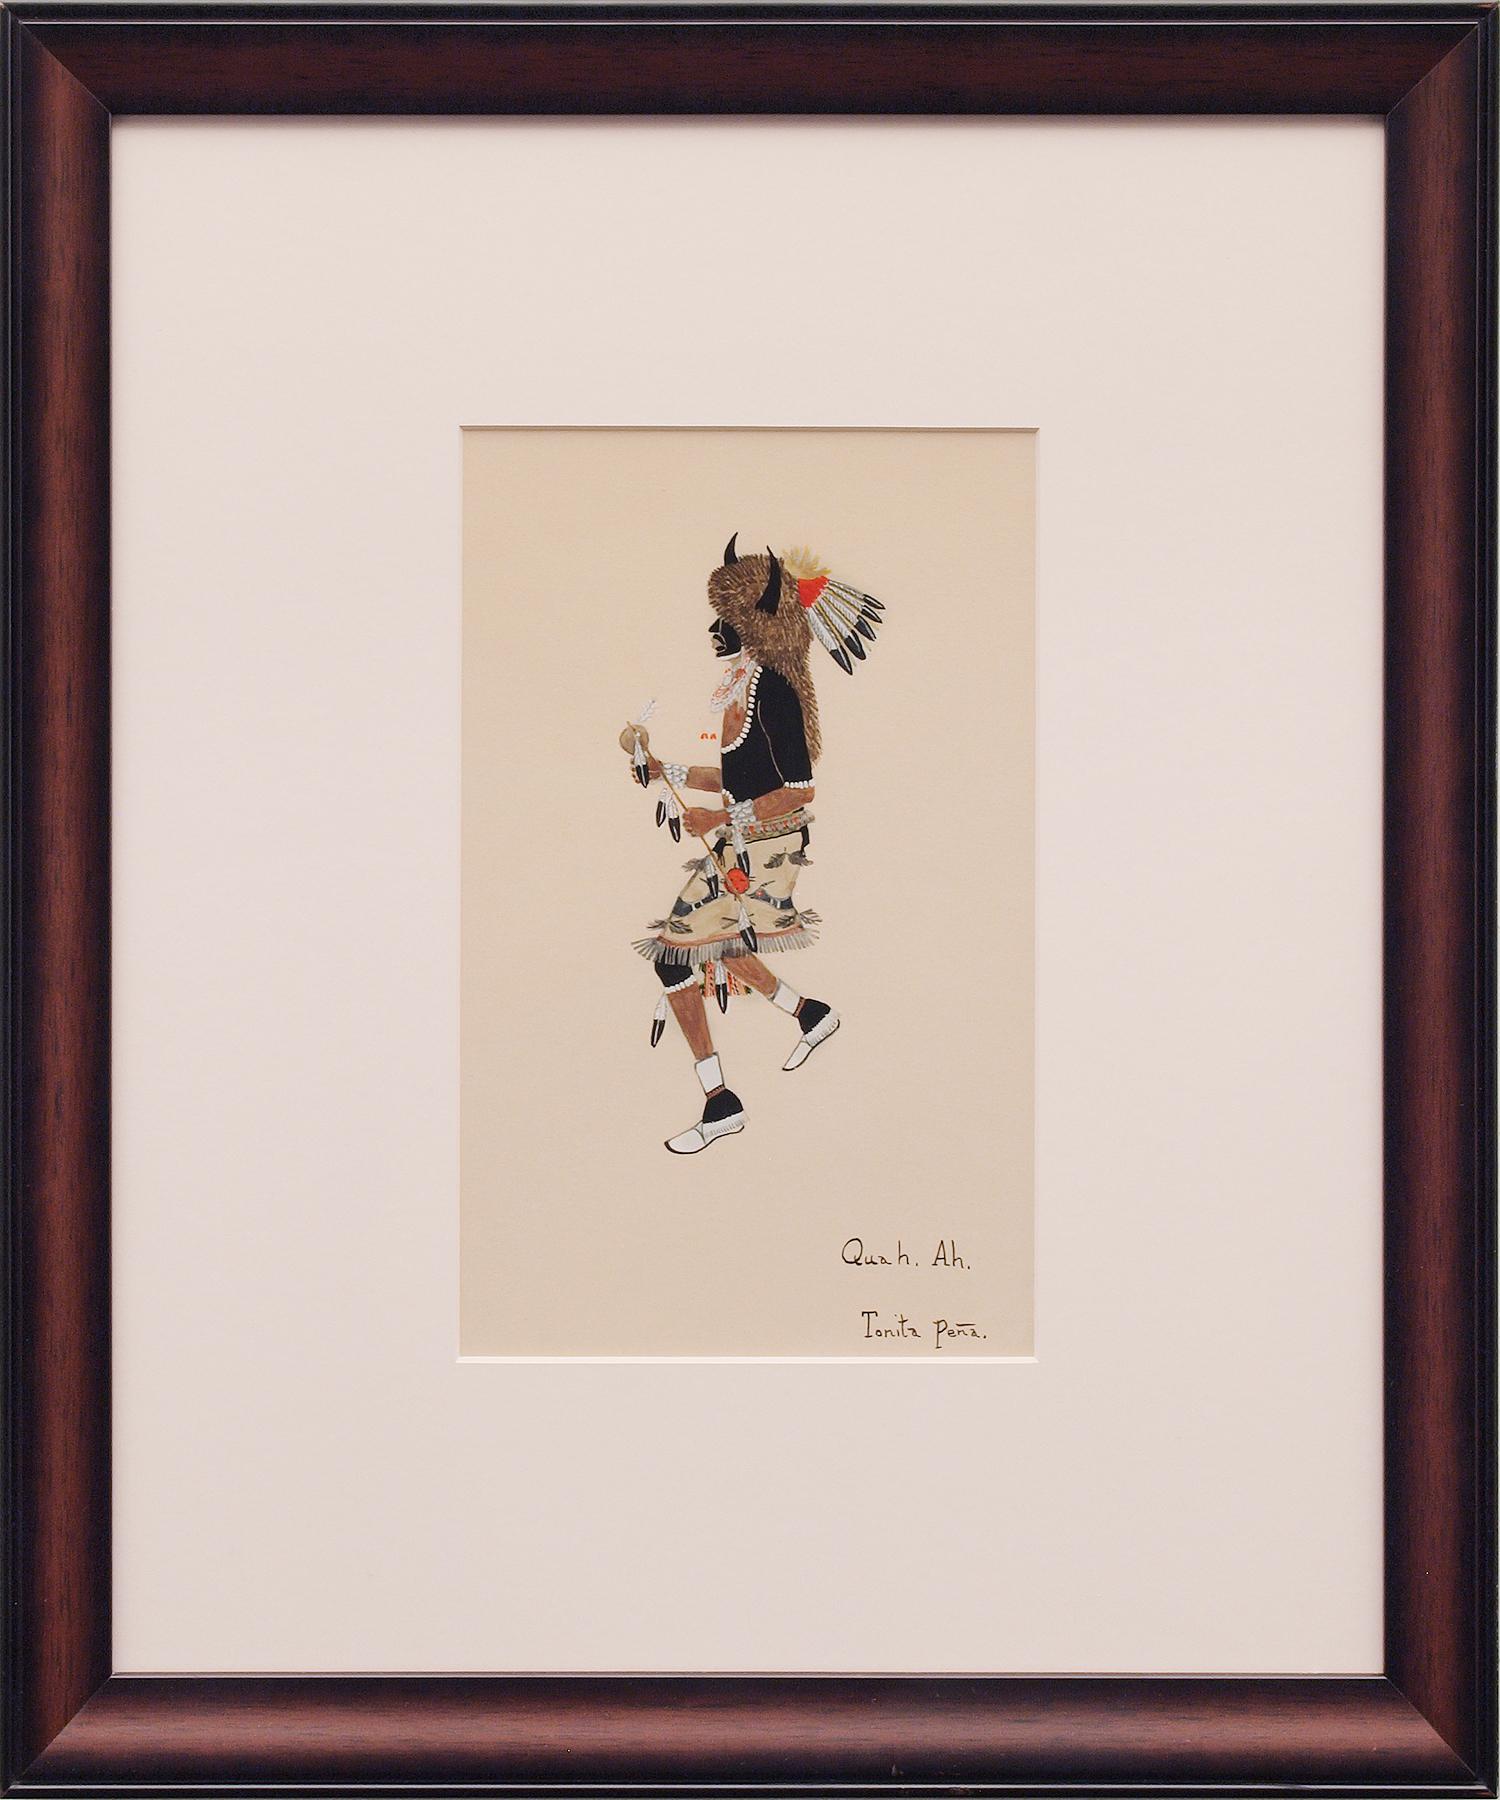 Original signed painting of a Pueblo Buffalo Dancer by early 20th century Native American artist, Tonita Peña (1895-1949). Also known as Quah Ah (her Tewa name), Peña was born in San Ildefonso, a small village in New Mexico, and later moved to